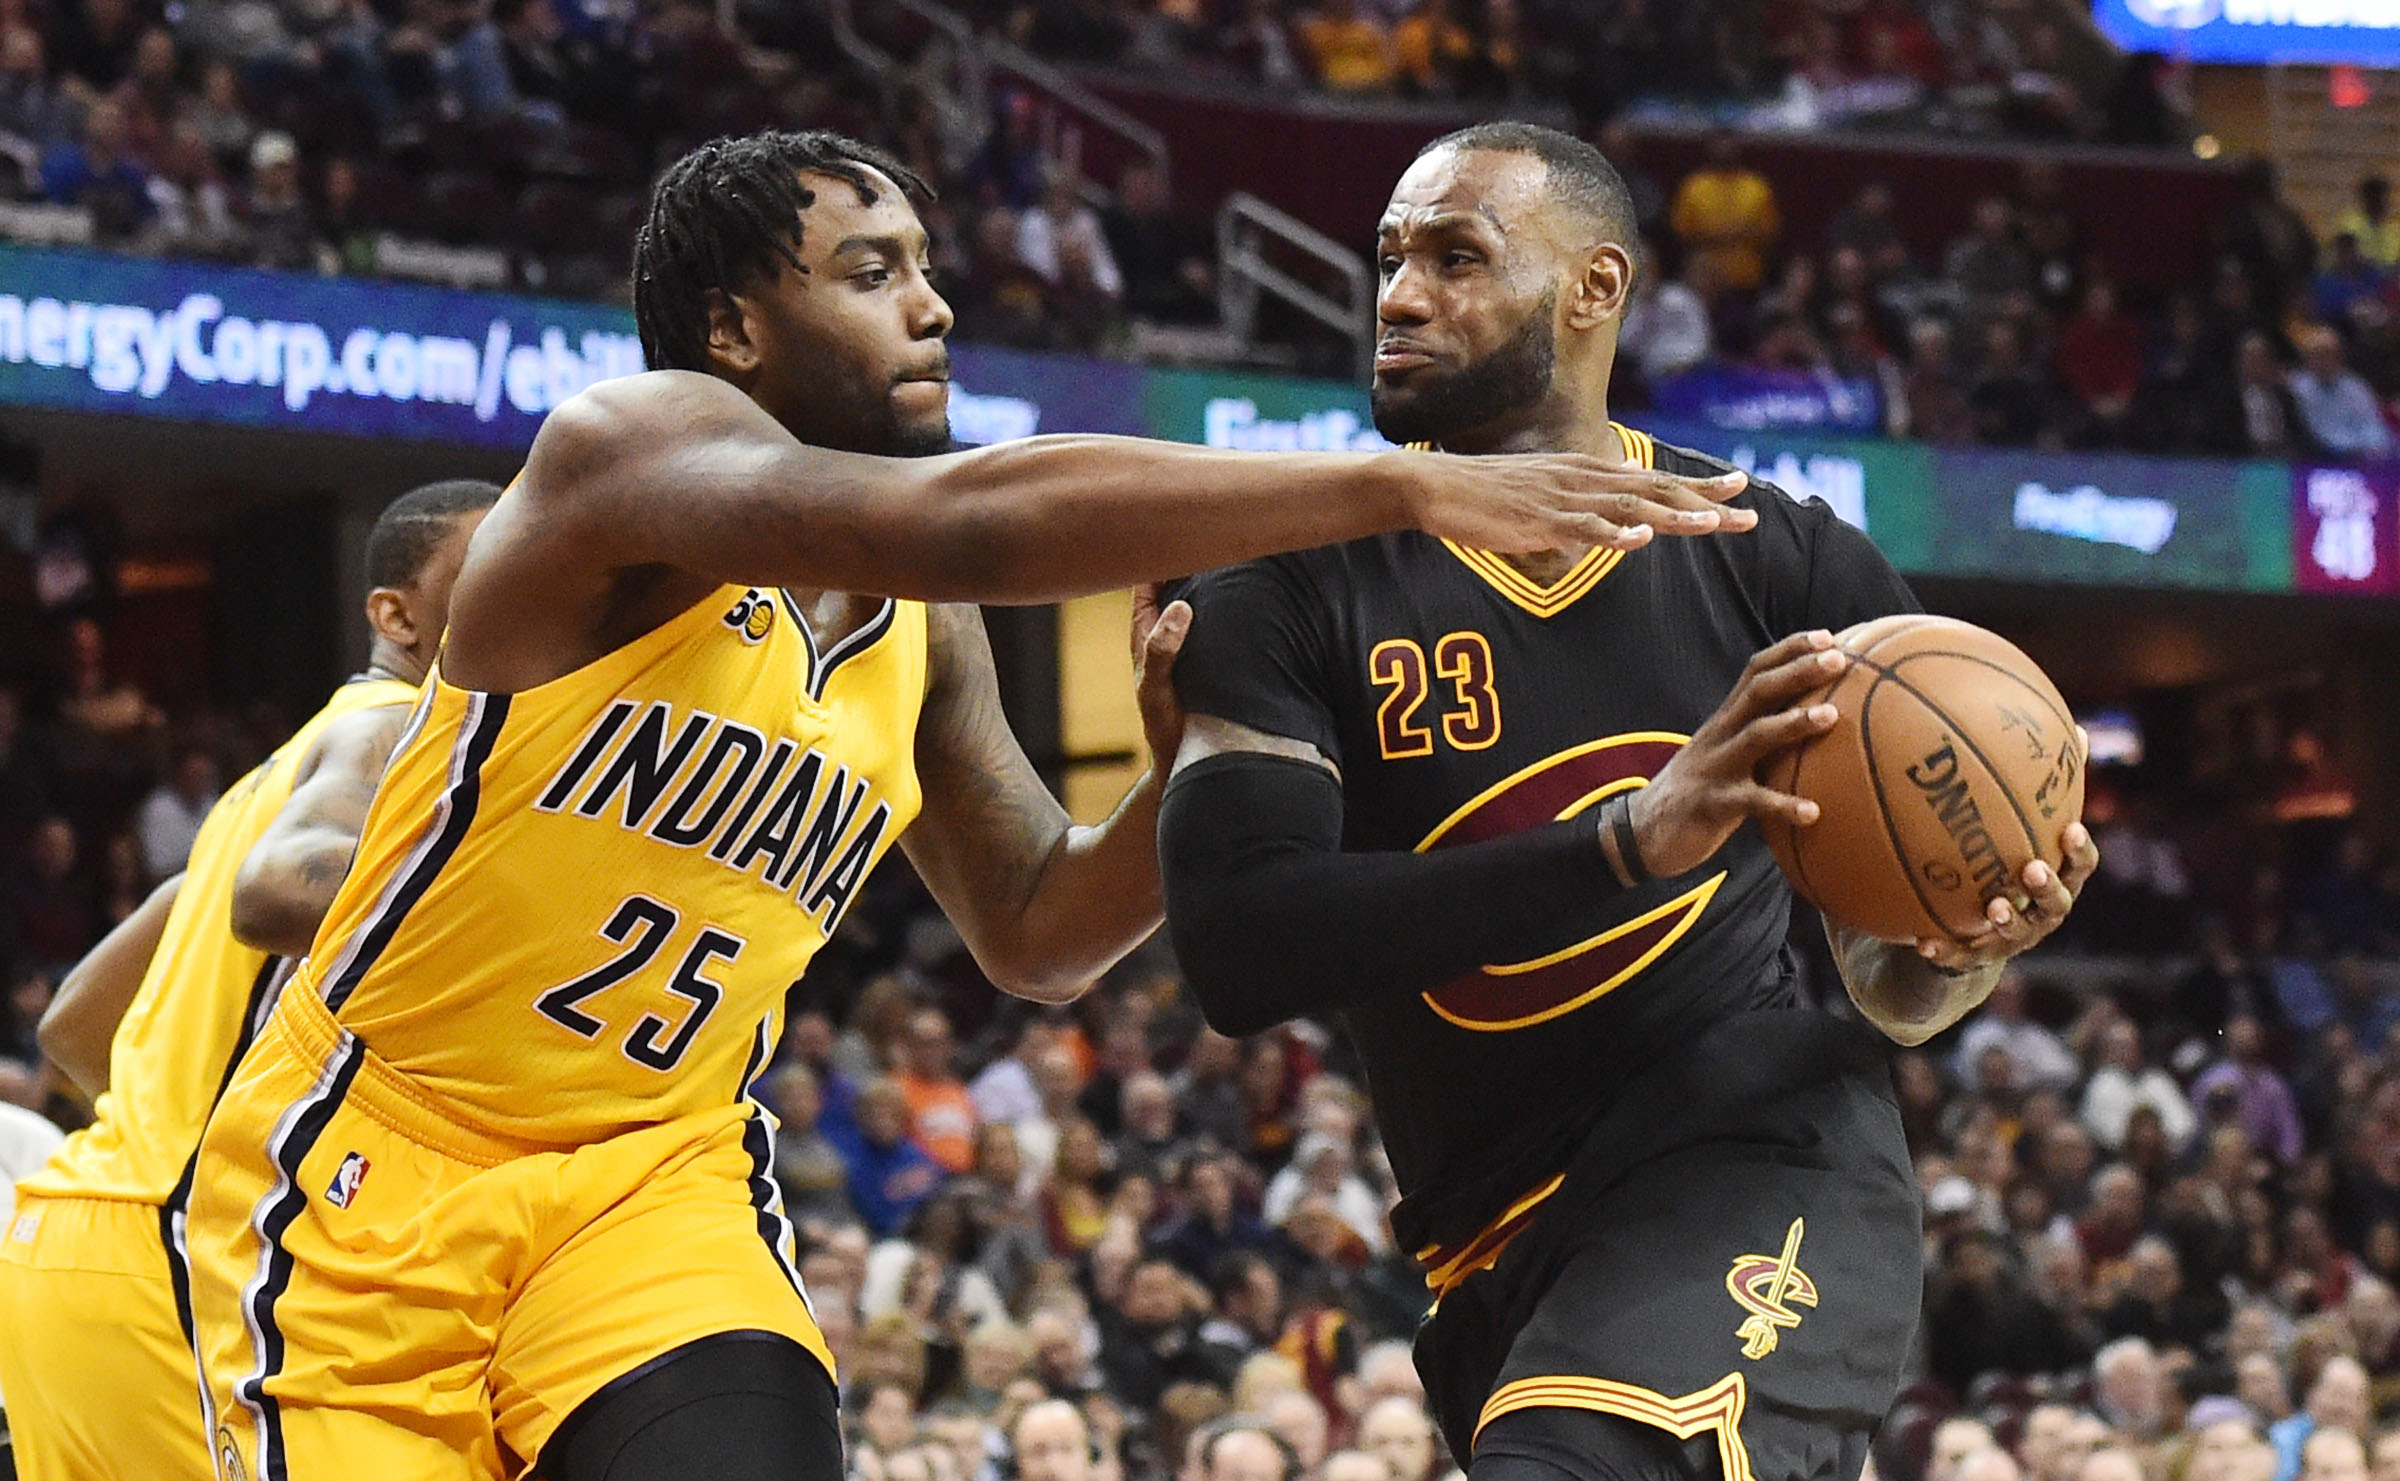 Pacers at Cavaliers live stream: How to watch online